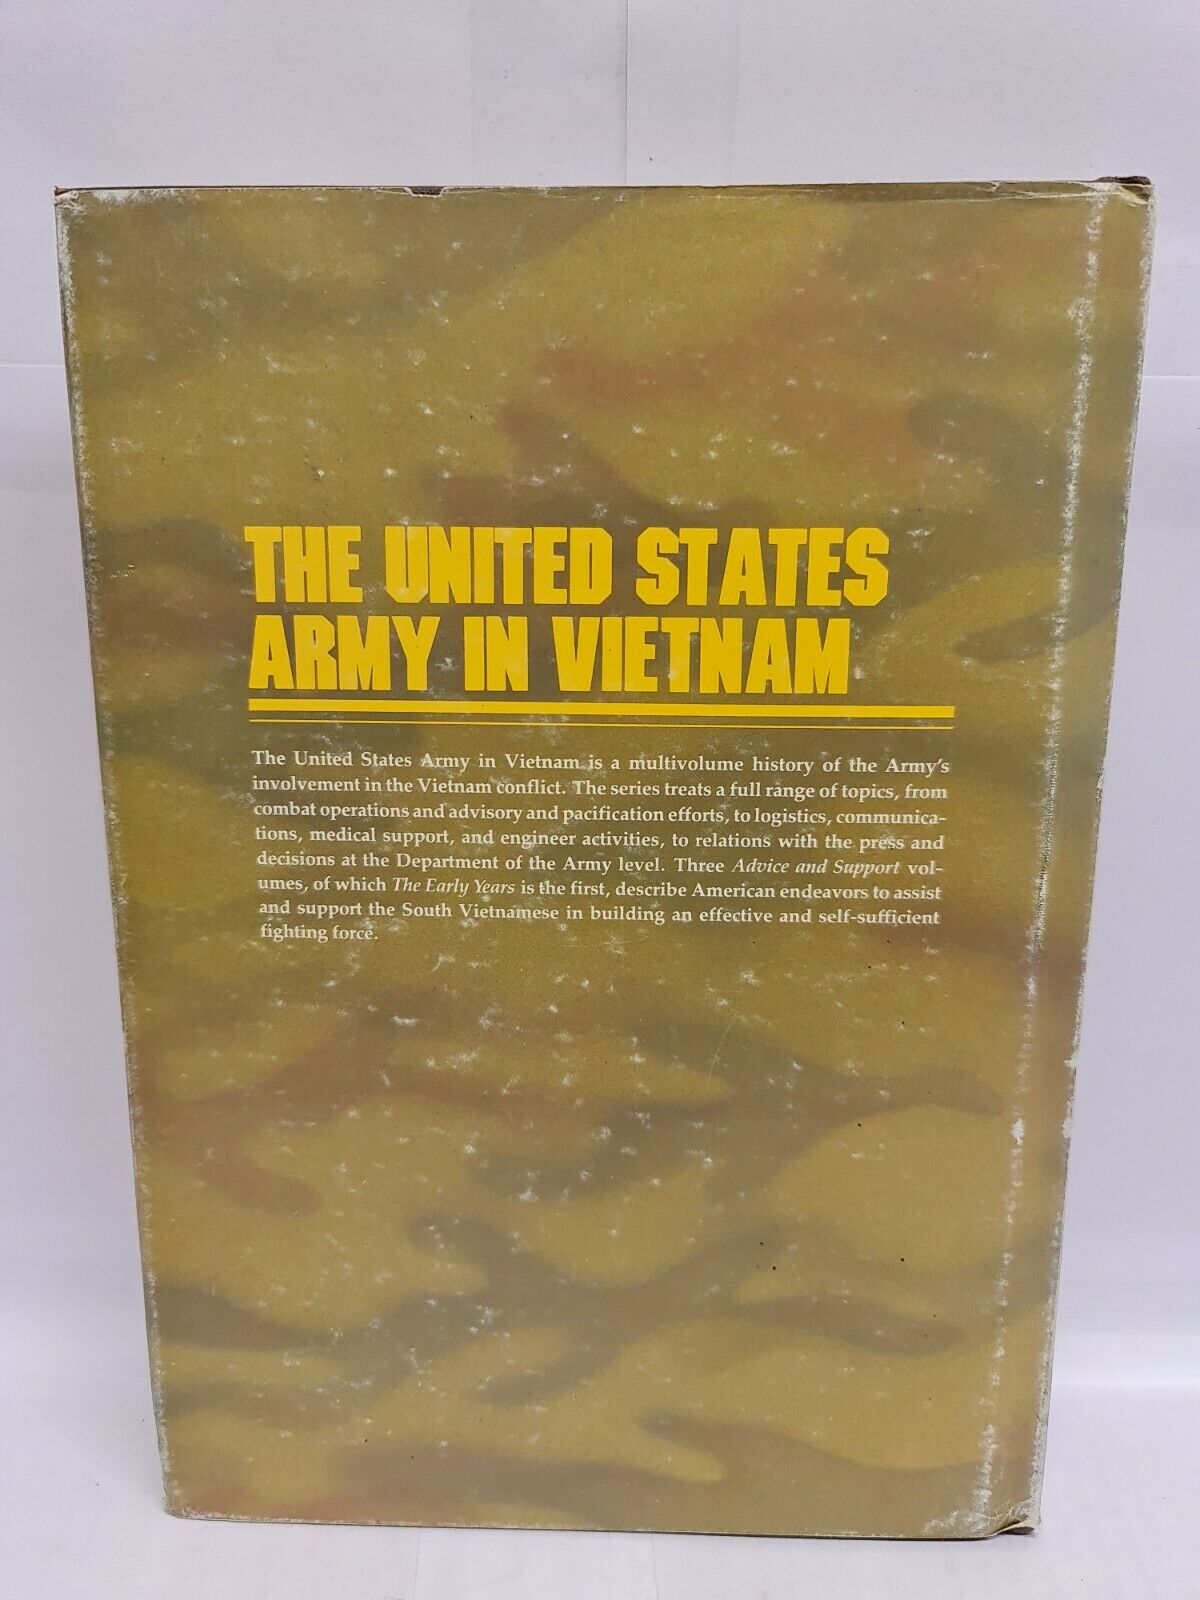 US Army in Vietnam; Advice and Support: The Early Years, 1941-1960 by Spector